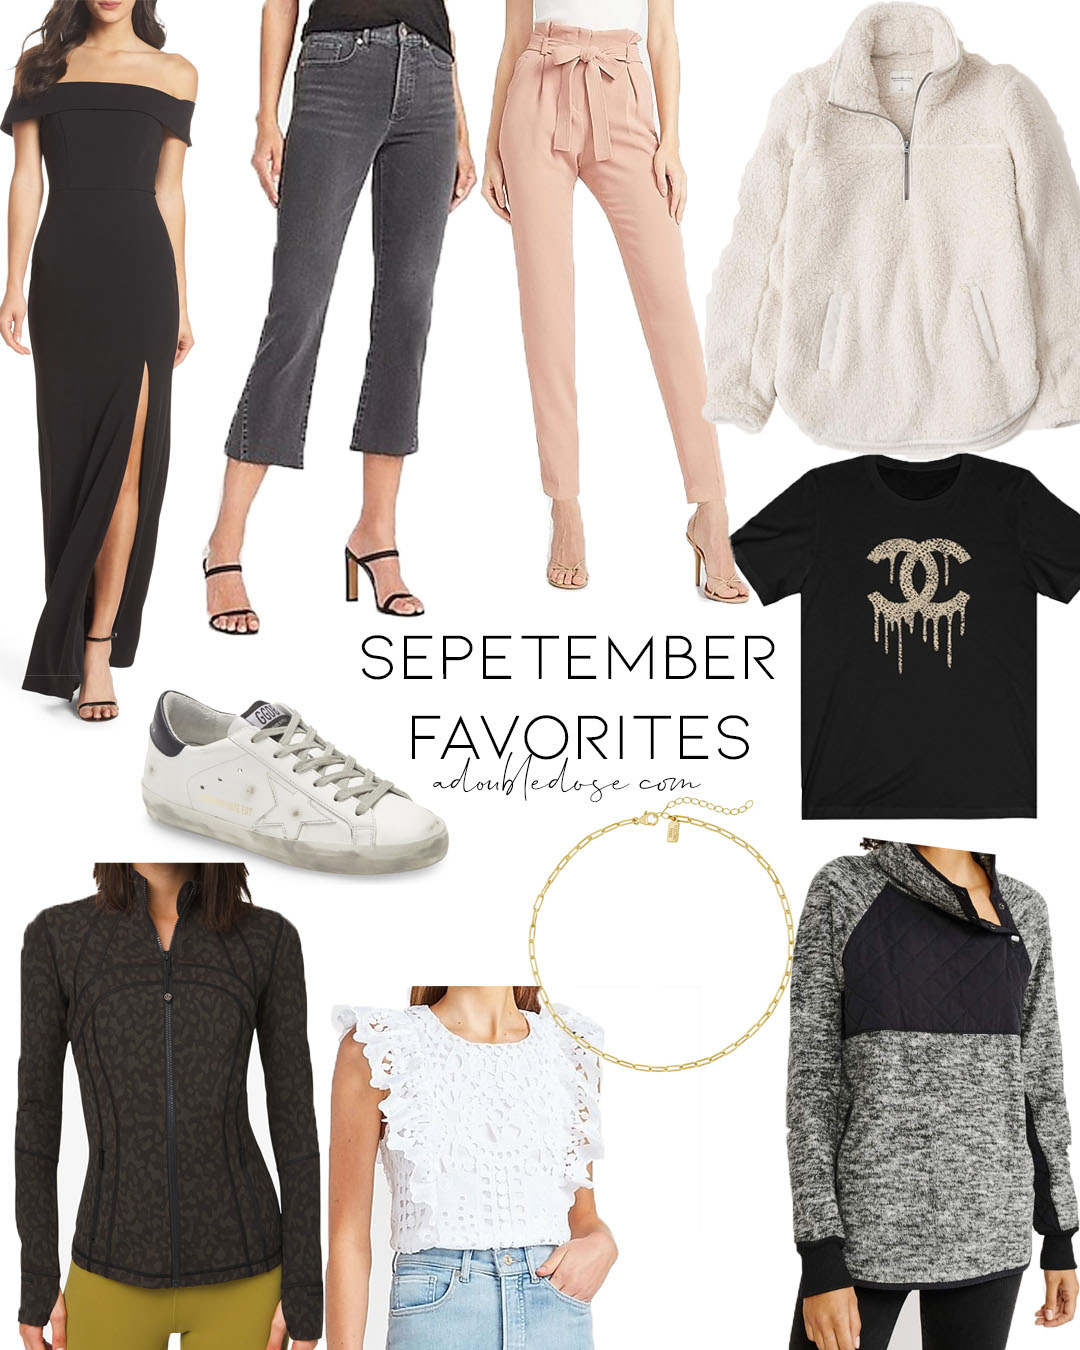 lifestyle and fashion blogger alexis belbel sharing her august favorites including chanel graphic tee, black cocktail dress, abercrombie fleece pullover, express flare jeans and more | adoubledose.com